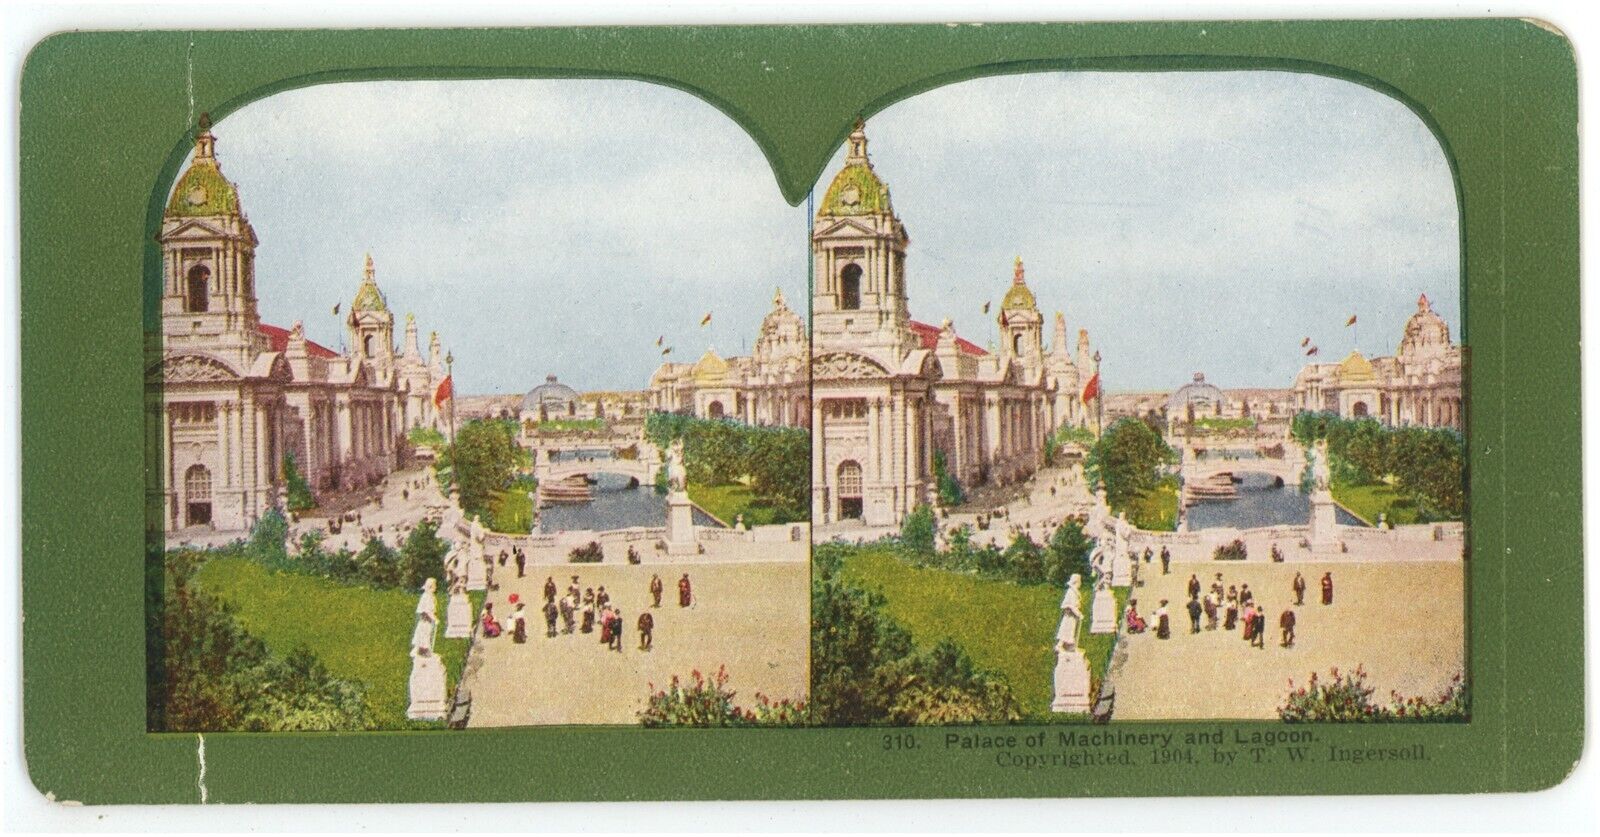 c1900's Ingersoll Color Stereoview Palace of Machinery and Lagoon Worlds Fair